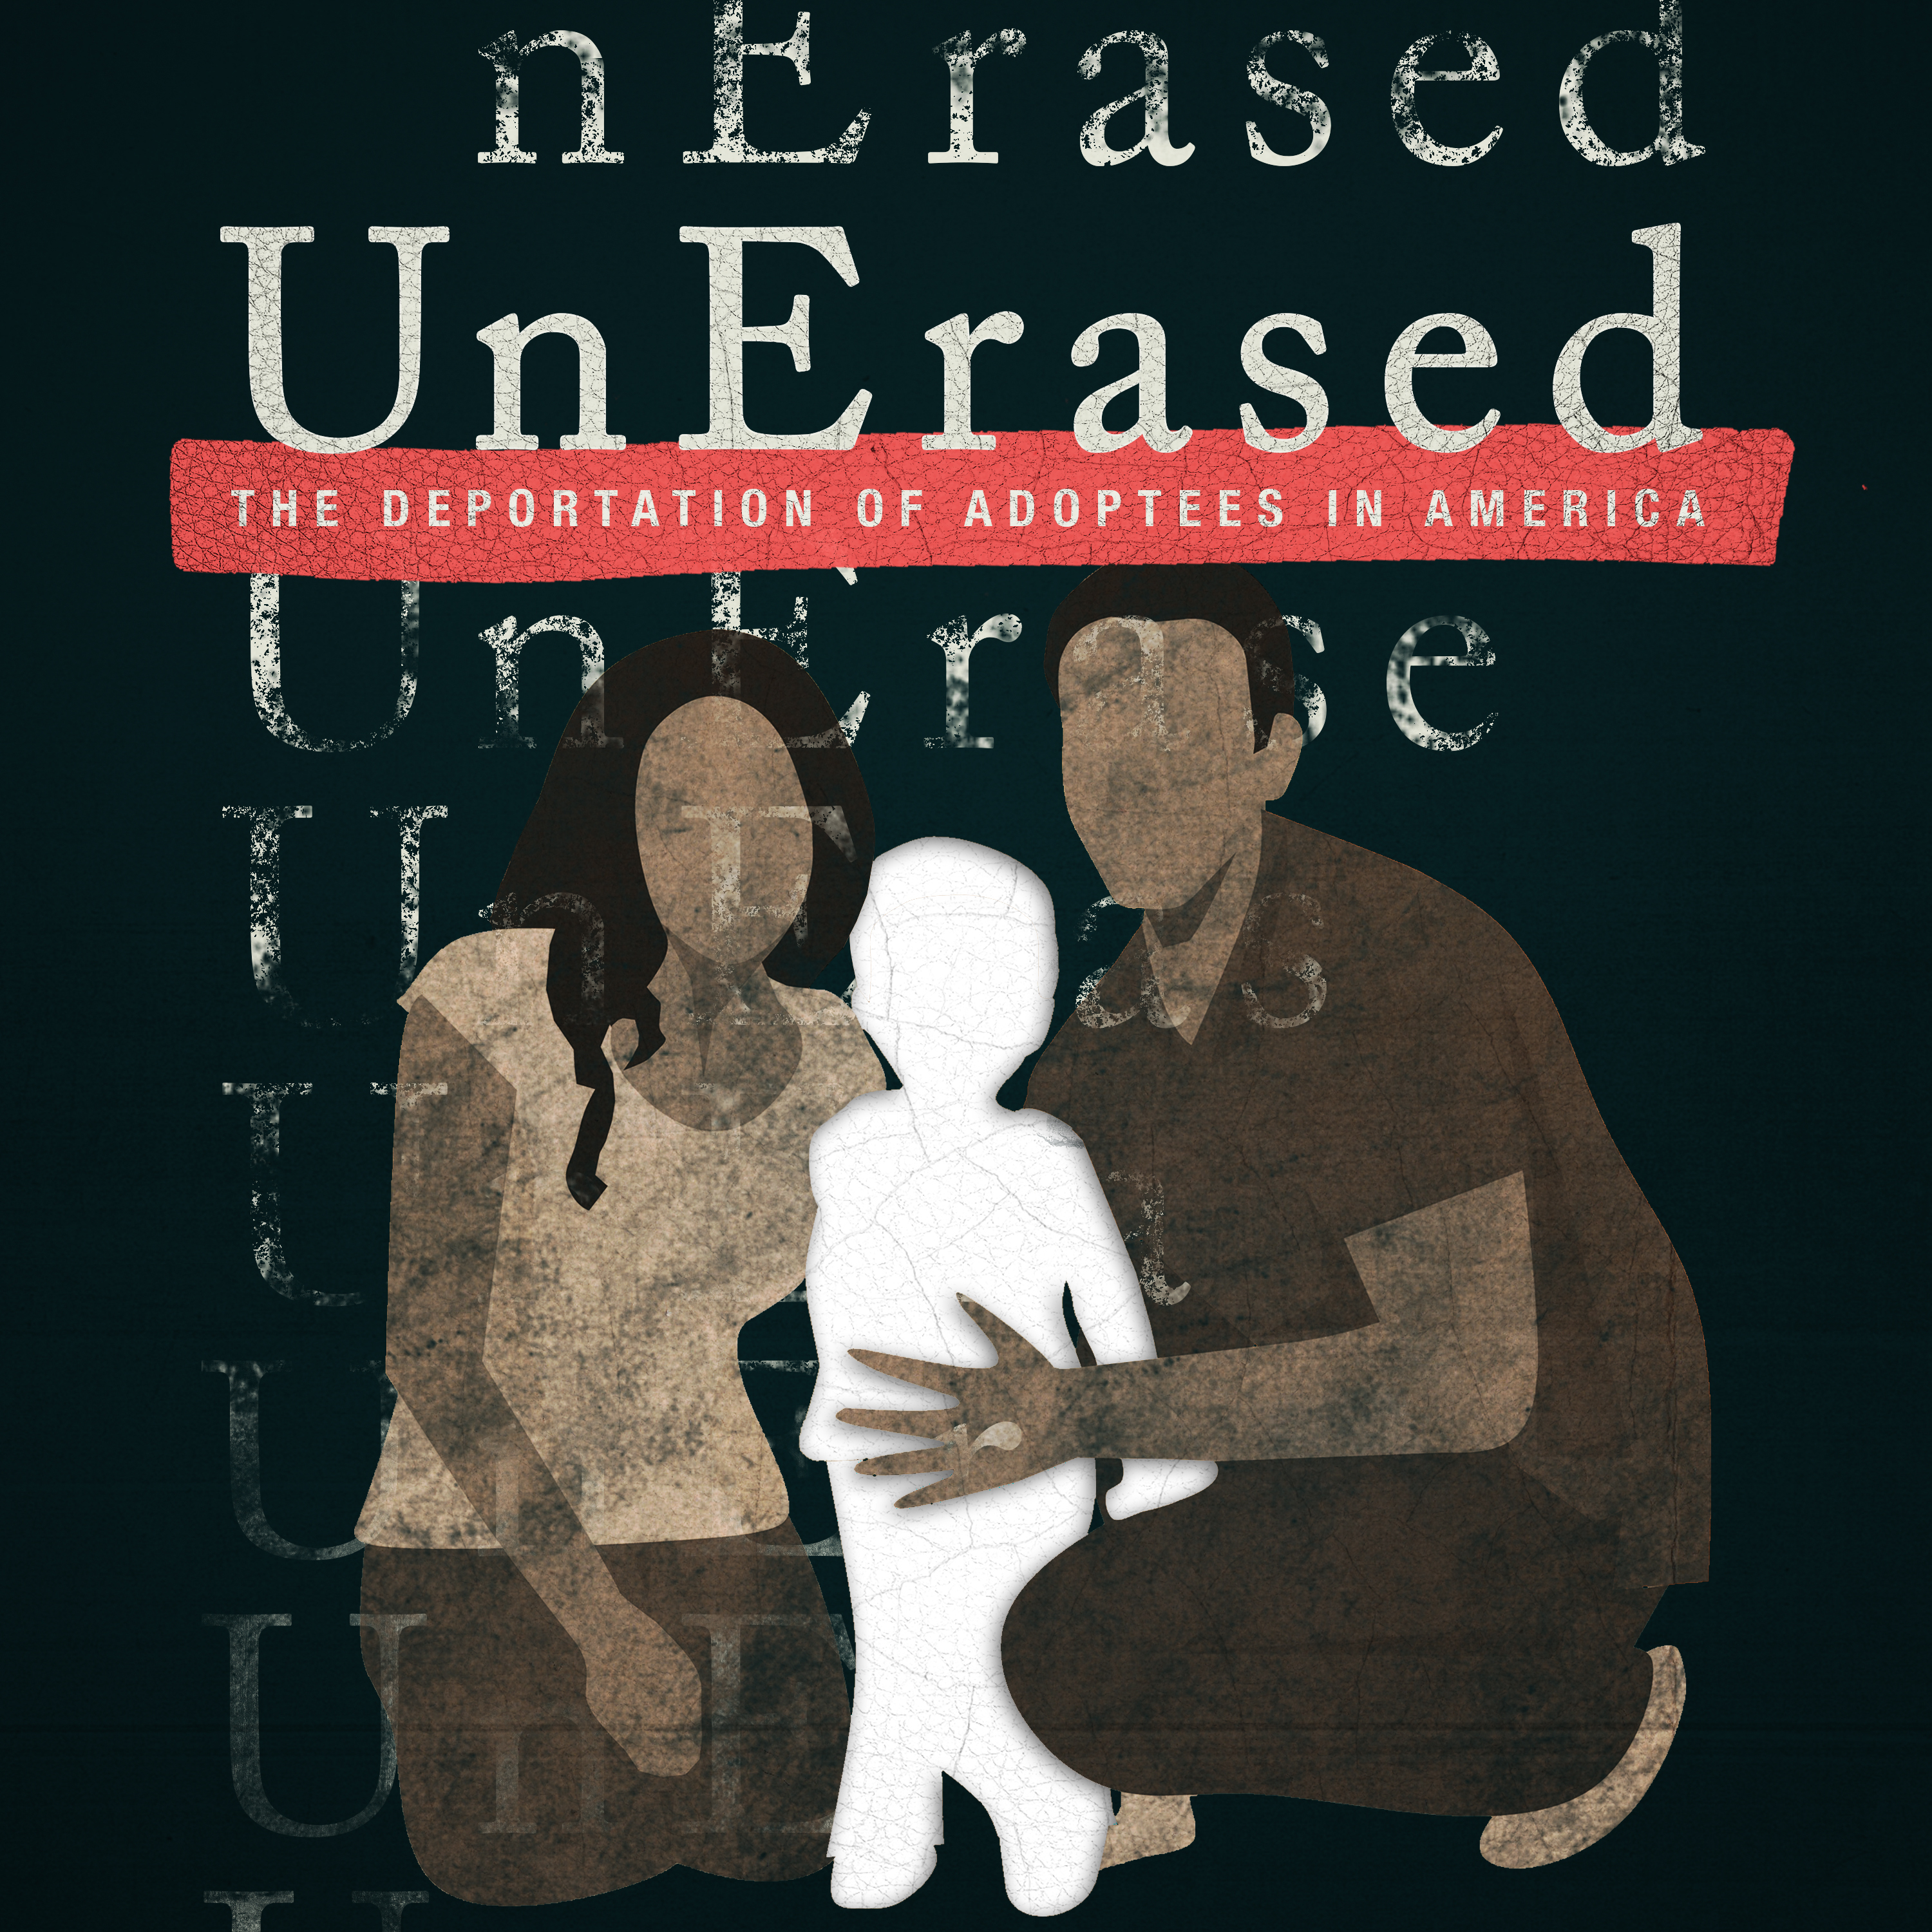 UnErased: The Deportation of Adoptees in America